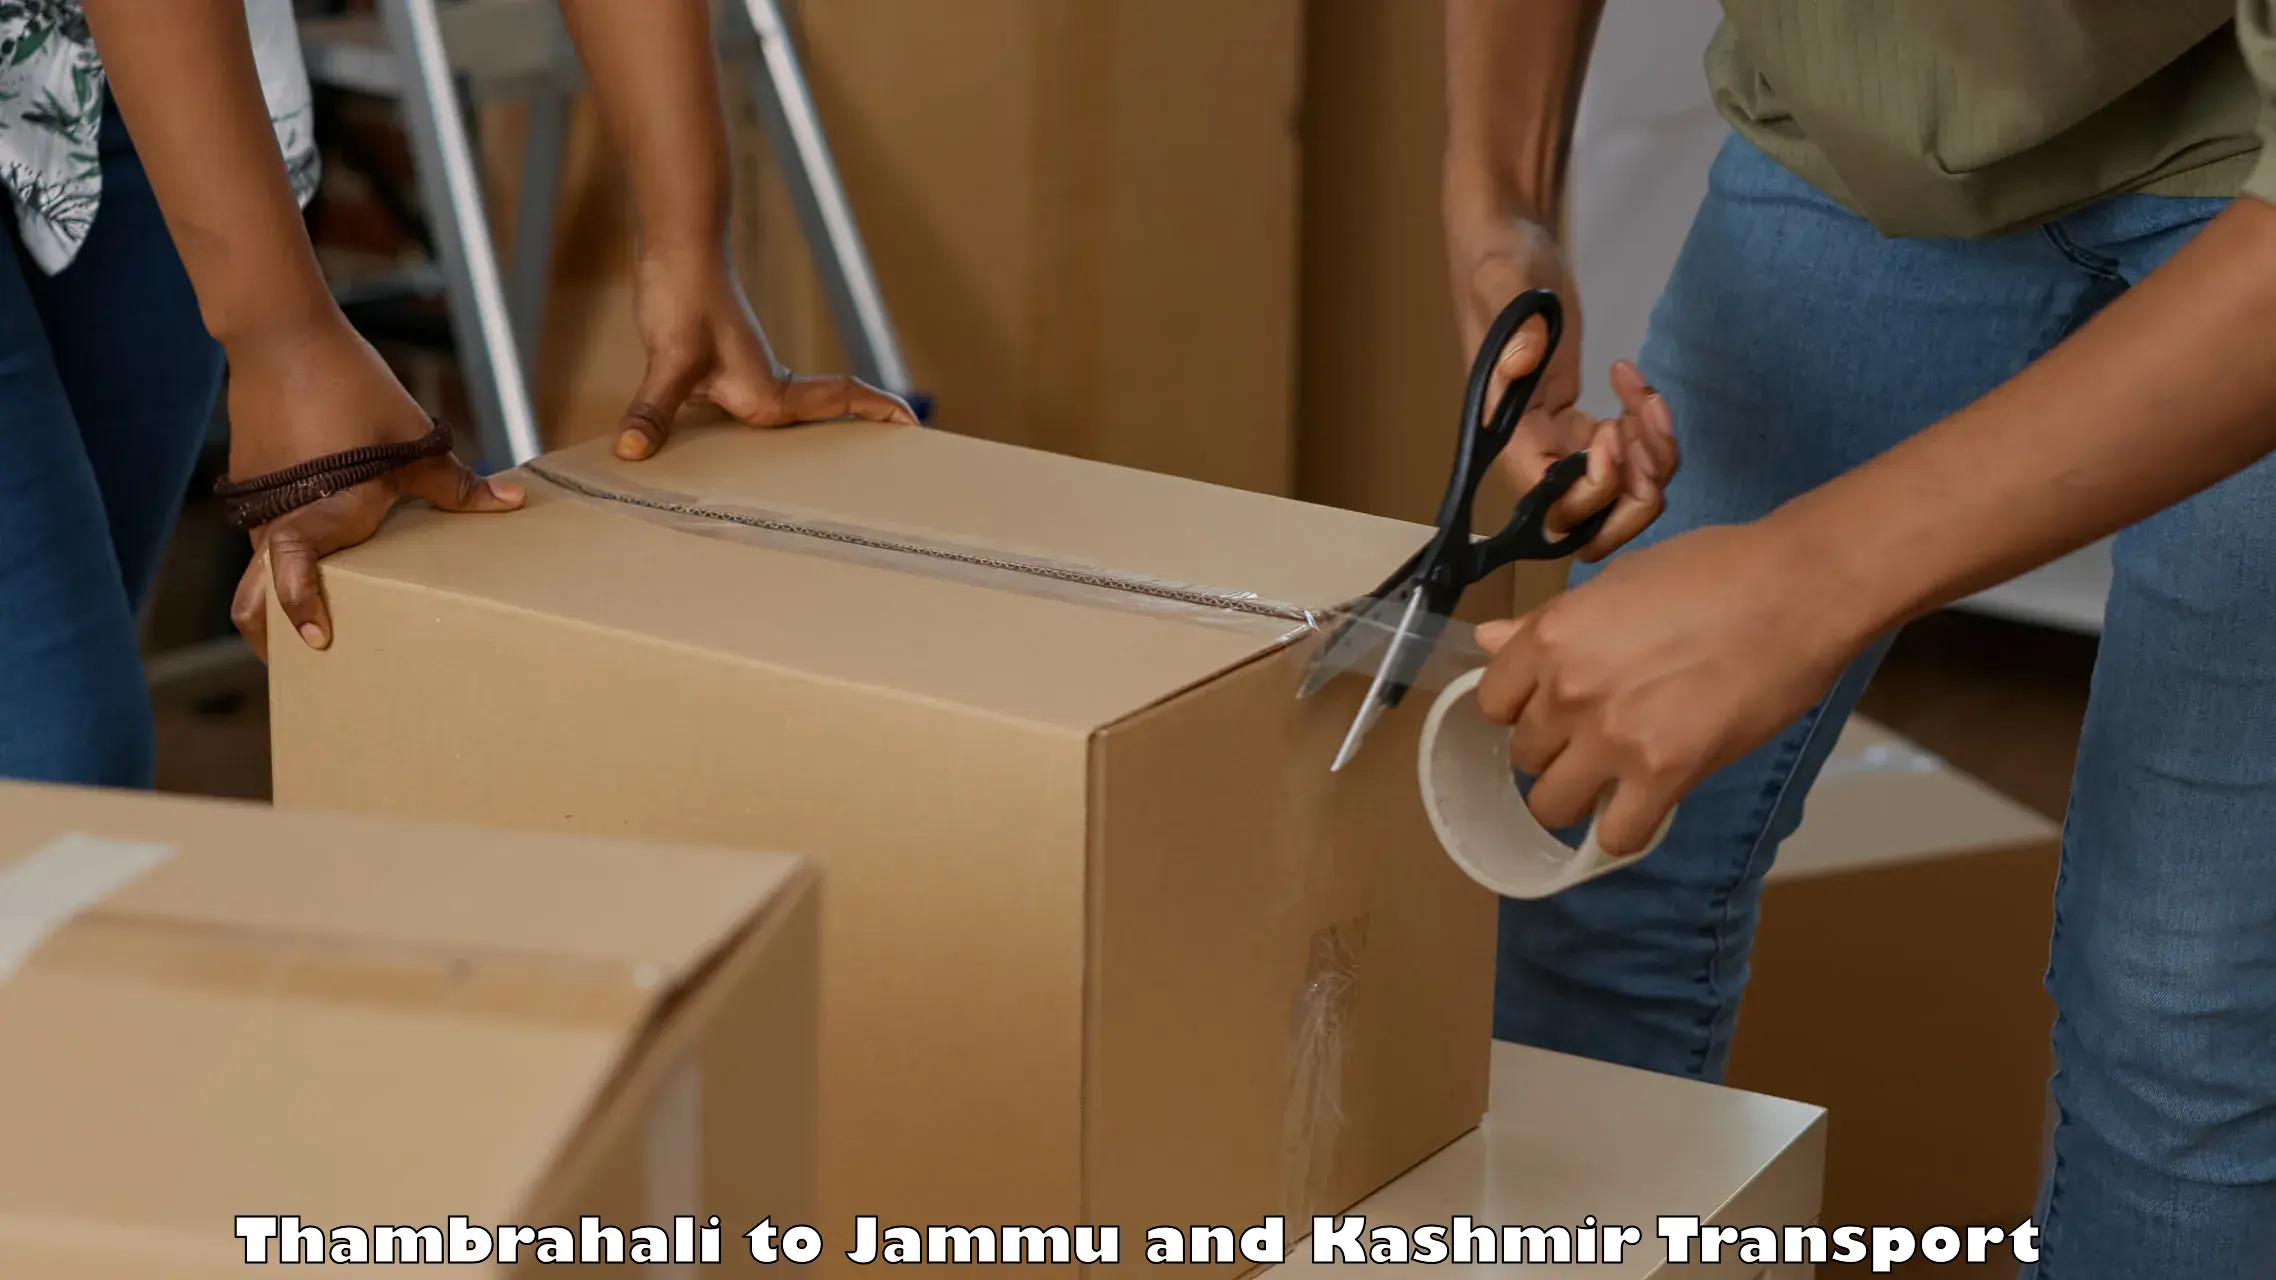 Parcel transport services Thambrahali to Jammu and Kashmir